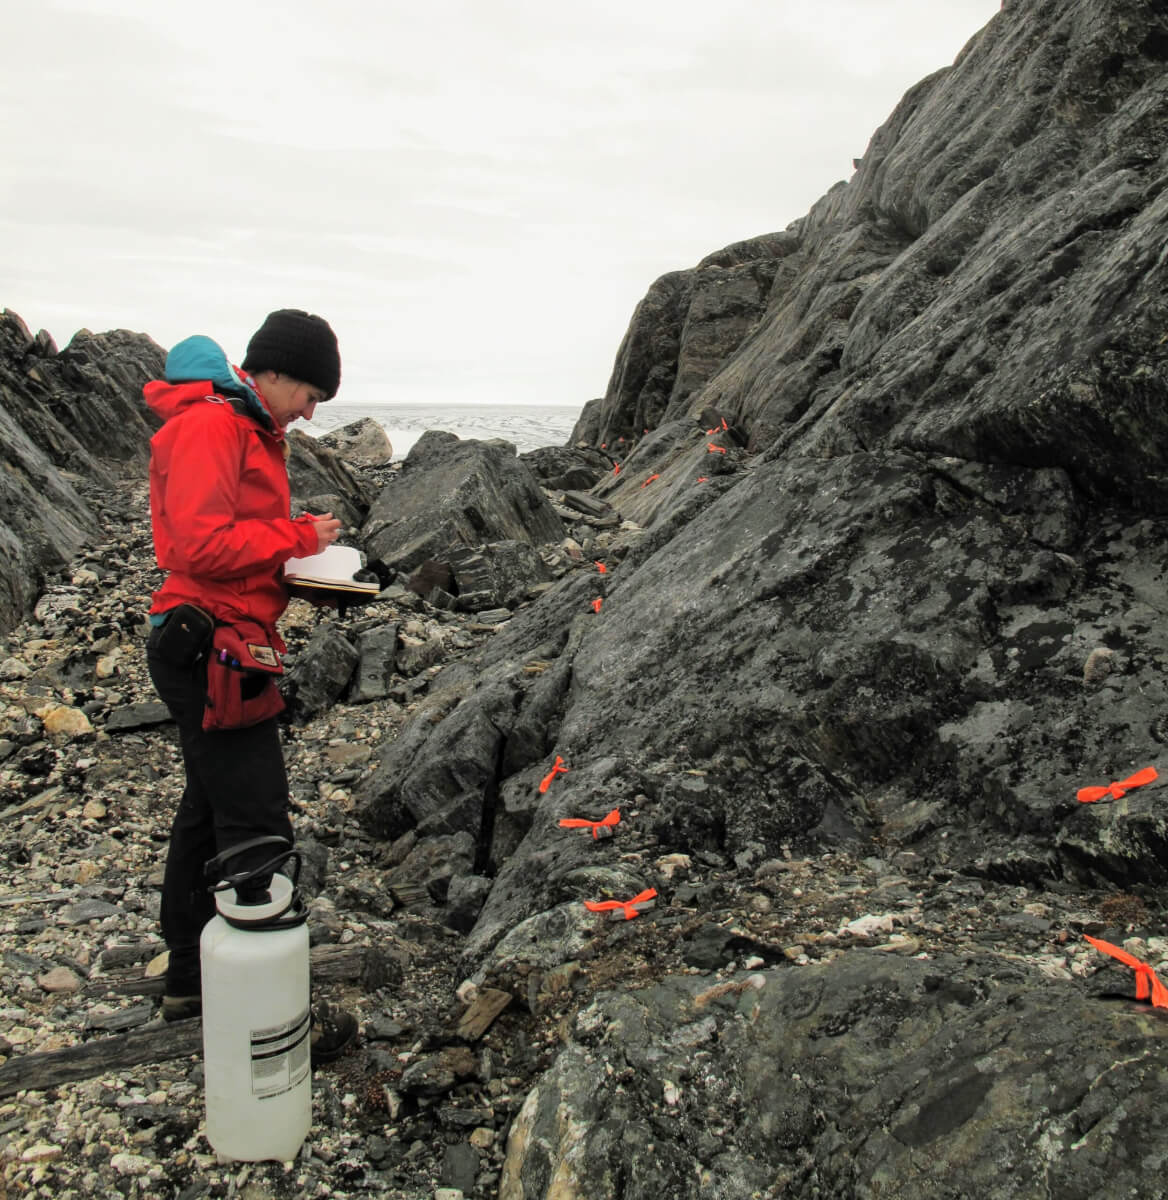 Samples were extracted along transects to compare the difference between 3.5 billion year old igneous intrusions, and the surrounding rock which the researchers have shown holds a record of the 3.7 billion year old magnetic field.